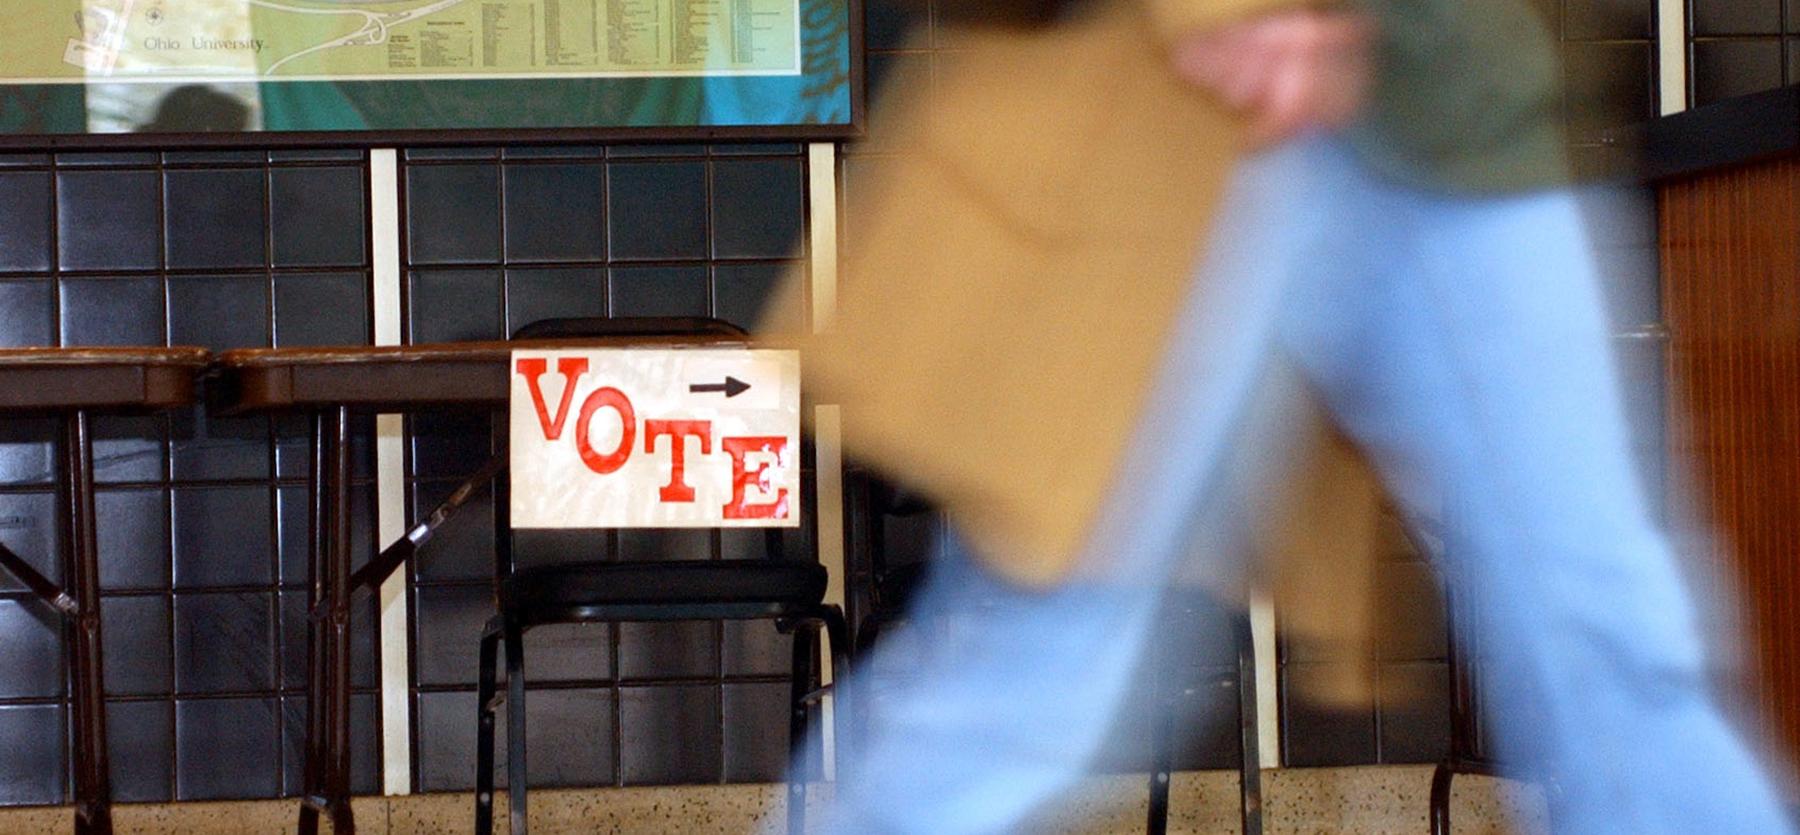 Out-of-focus person walks past a sign on a table that says "vote"